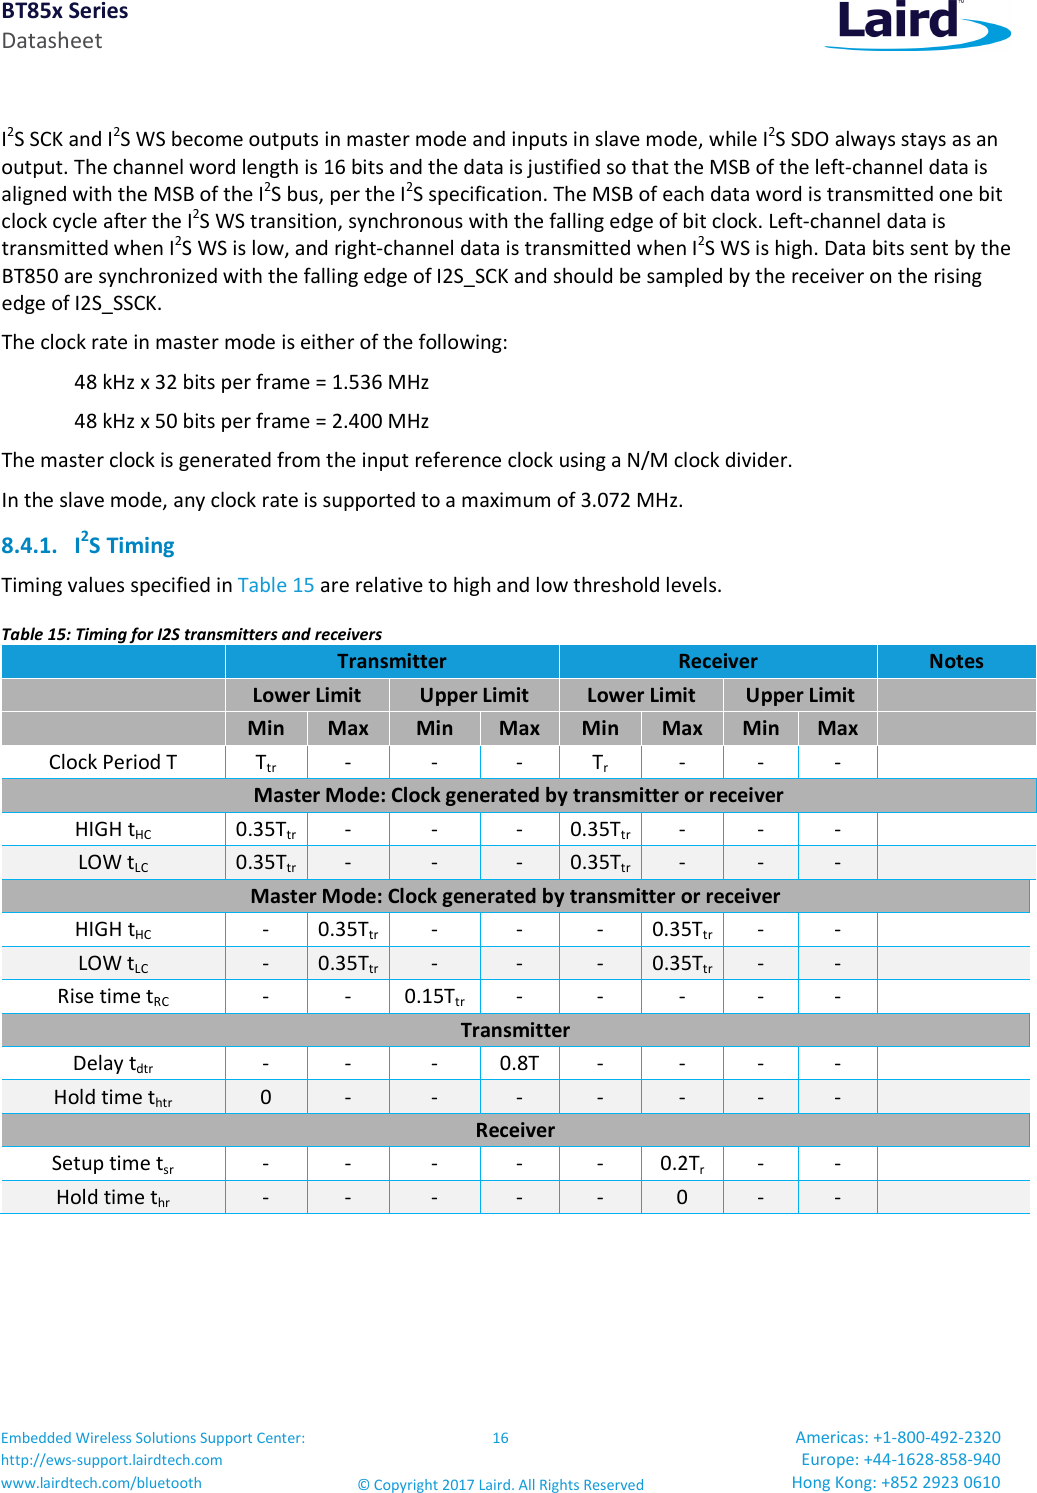 BT85x Series Datasheet Embedded Wireless Solutions Support Center: http://ews-support.lairdtech.com www.lairdtech.com/bluetooth 16 © Copyright 2017 Laird. All Rights Reserved Americas: +1-800-492-2320 Europe: +44-1628-858-940 Hong Kong: +852 2923 0610   I2S SCK and I2S WS become outputs in master mode and inputs in slave mode, while I2S SDO always stays as an output. The channel word length is 16 bits and the data is justified so that the MSB of the left-channel data is aligned with the MSB of the I2S bus, per the I2S specification. The MSB of each data word is transmitted one bit clock cycle after the I2S WS transition, synchronous with the falling edge of bit clock. Left-channel data is transmitted when I2S WS is low, and right-channel data is transmitted when I2S WS is high. Data bits sent by the BT850 are synchronized with the falling edge of I2S_SCK and should be sampled by the receiver on the rising edge of I2S_SSCK. The clock rate in master mode is either of the following:   48 kHz x 32 bits per frame = 1.536 MHz   48 kHz x 50 bits per frame = 2.400 MHz The master clock is generated from the input reference clock using a N/M clock divider. In the slave mode, any clock rate is supported to a maximum of 3.072 MHz. 8.4.1. I2S Timing Timing values specified in Table 15 are relative to high and low threshold levels. Table 15: Timing for I2S transmitters and receivers   Transmitter  Receiver  Notes  Lower Limit  Upper Limit  Lower Limit  Upper Limit    Min  Max  Min  Max  Min  Max  Min  Max   Clock Period T  Ttr  -  -  -  Tr  -  -  -   Master Mode: Clock generated by transmitter or receiver HIGH tHC  0.35Ttr -  -  -  0.35Ttr -  -  -   LOW tLC  0.35Ttr -  -  -  0.35Ttr -  -  -   Master Mode: Clock generated by transmitter or receiver HIGH tHC  -  0.35Ttr -  -  -  0.35Ttr -  -   LOW tLC  -  0.35Ttr -  -  -  0.35Ttr -  -   Rise time tRC  -  -  0.15Ttr -  -  -  -  -   Transmitter Delay tdtr  -  -  -  0.8T  -  -  -  -   Hold time thtr  0  -  -  -  -  -  -  -   Receiver Setup time tsr  -  -  -  -  -  0.2Tr  -  -   Hold time thr  -  -  -  -  -  0  -  -   